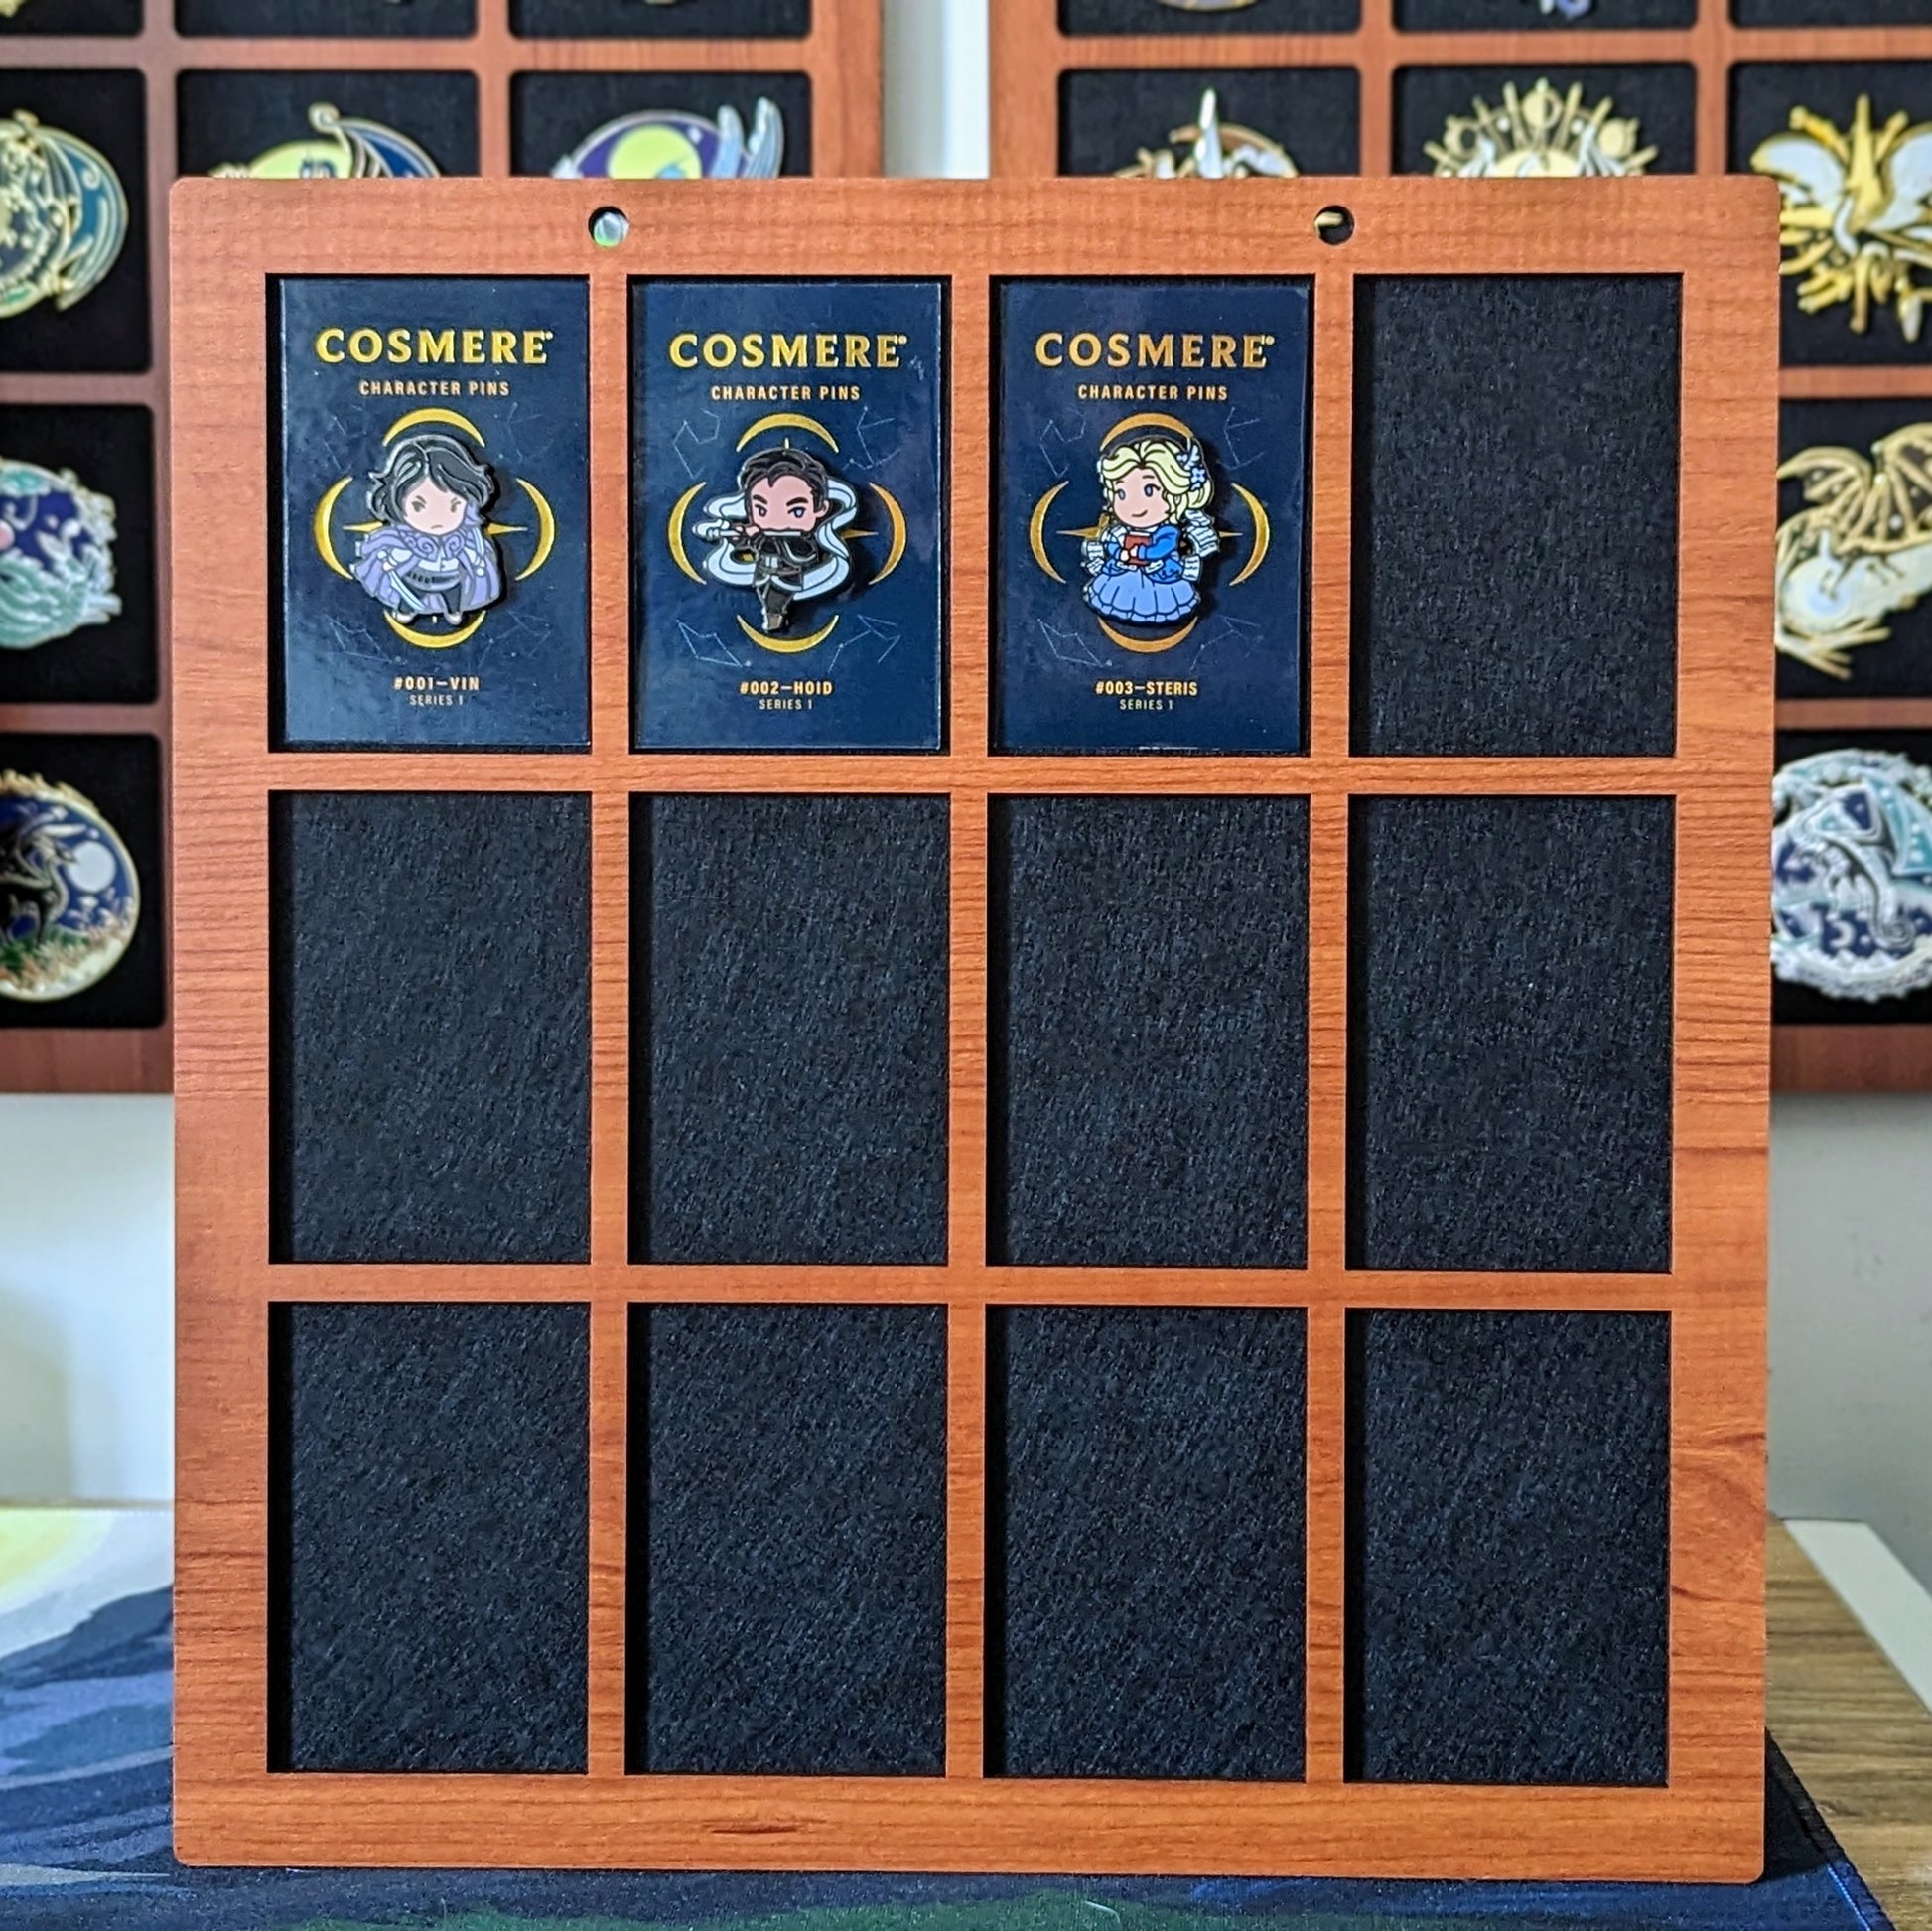 12X12 Pin Display With Standard or Large Pin Format Pinboards. See  Description for Details. 